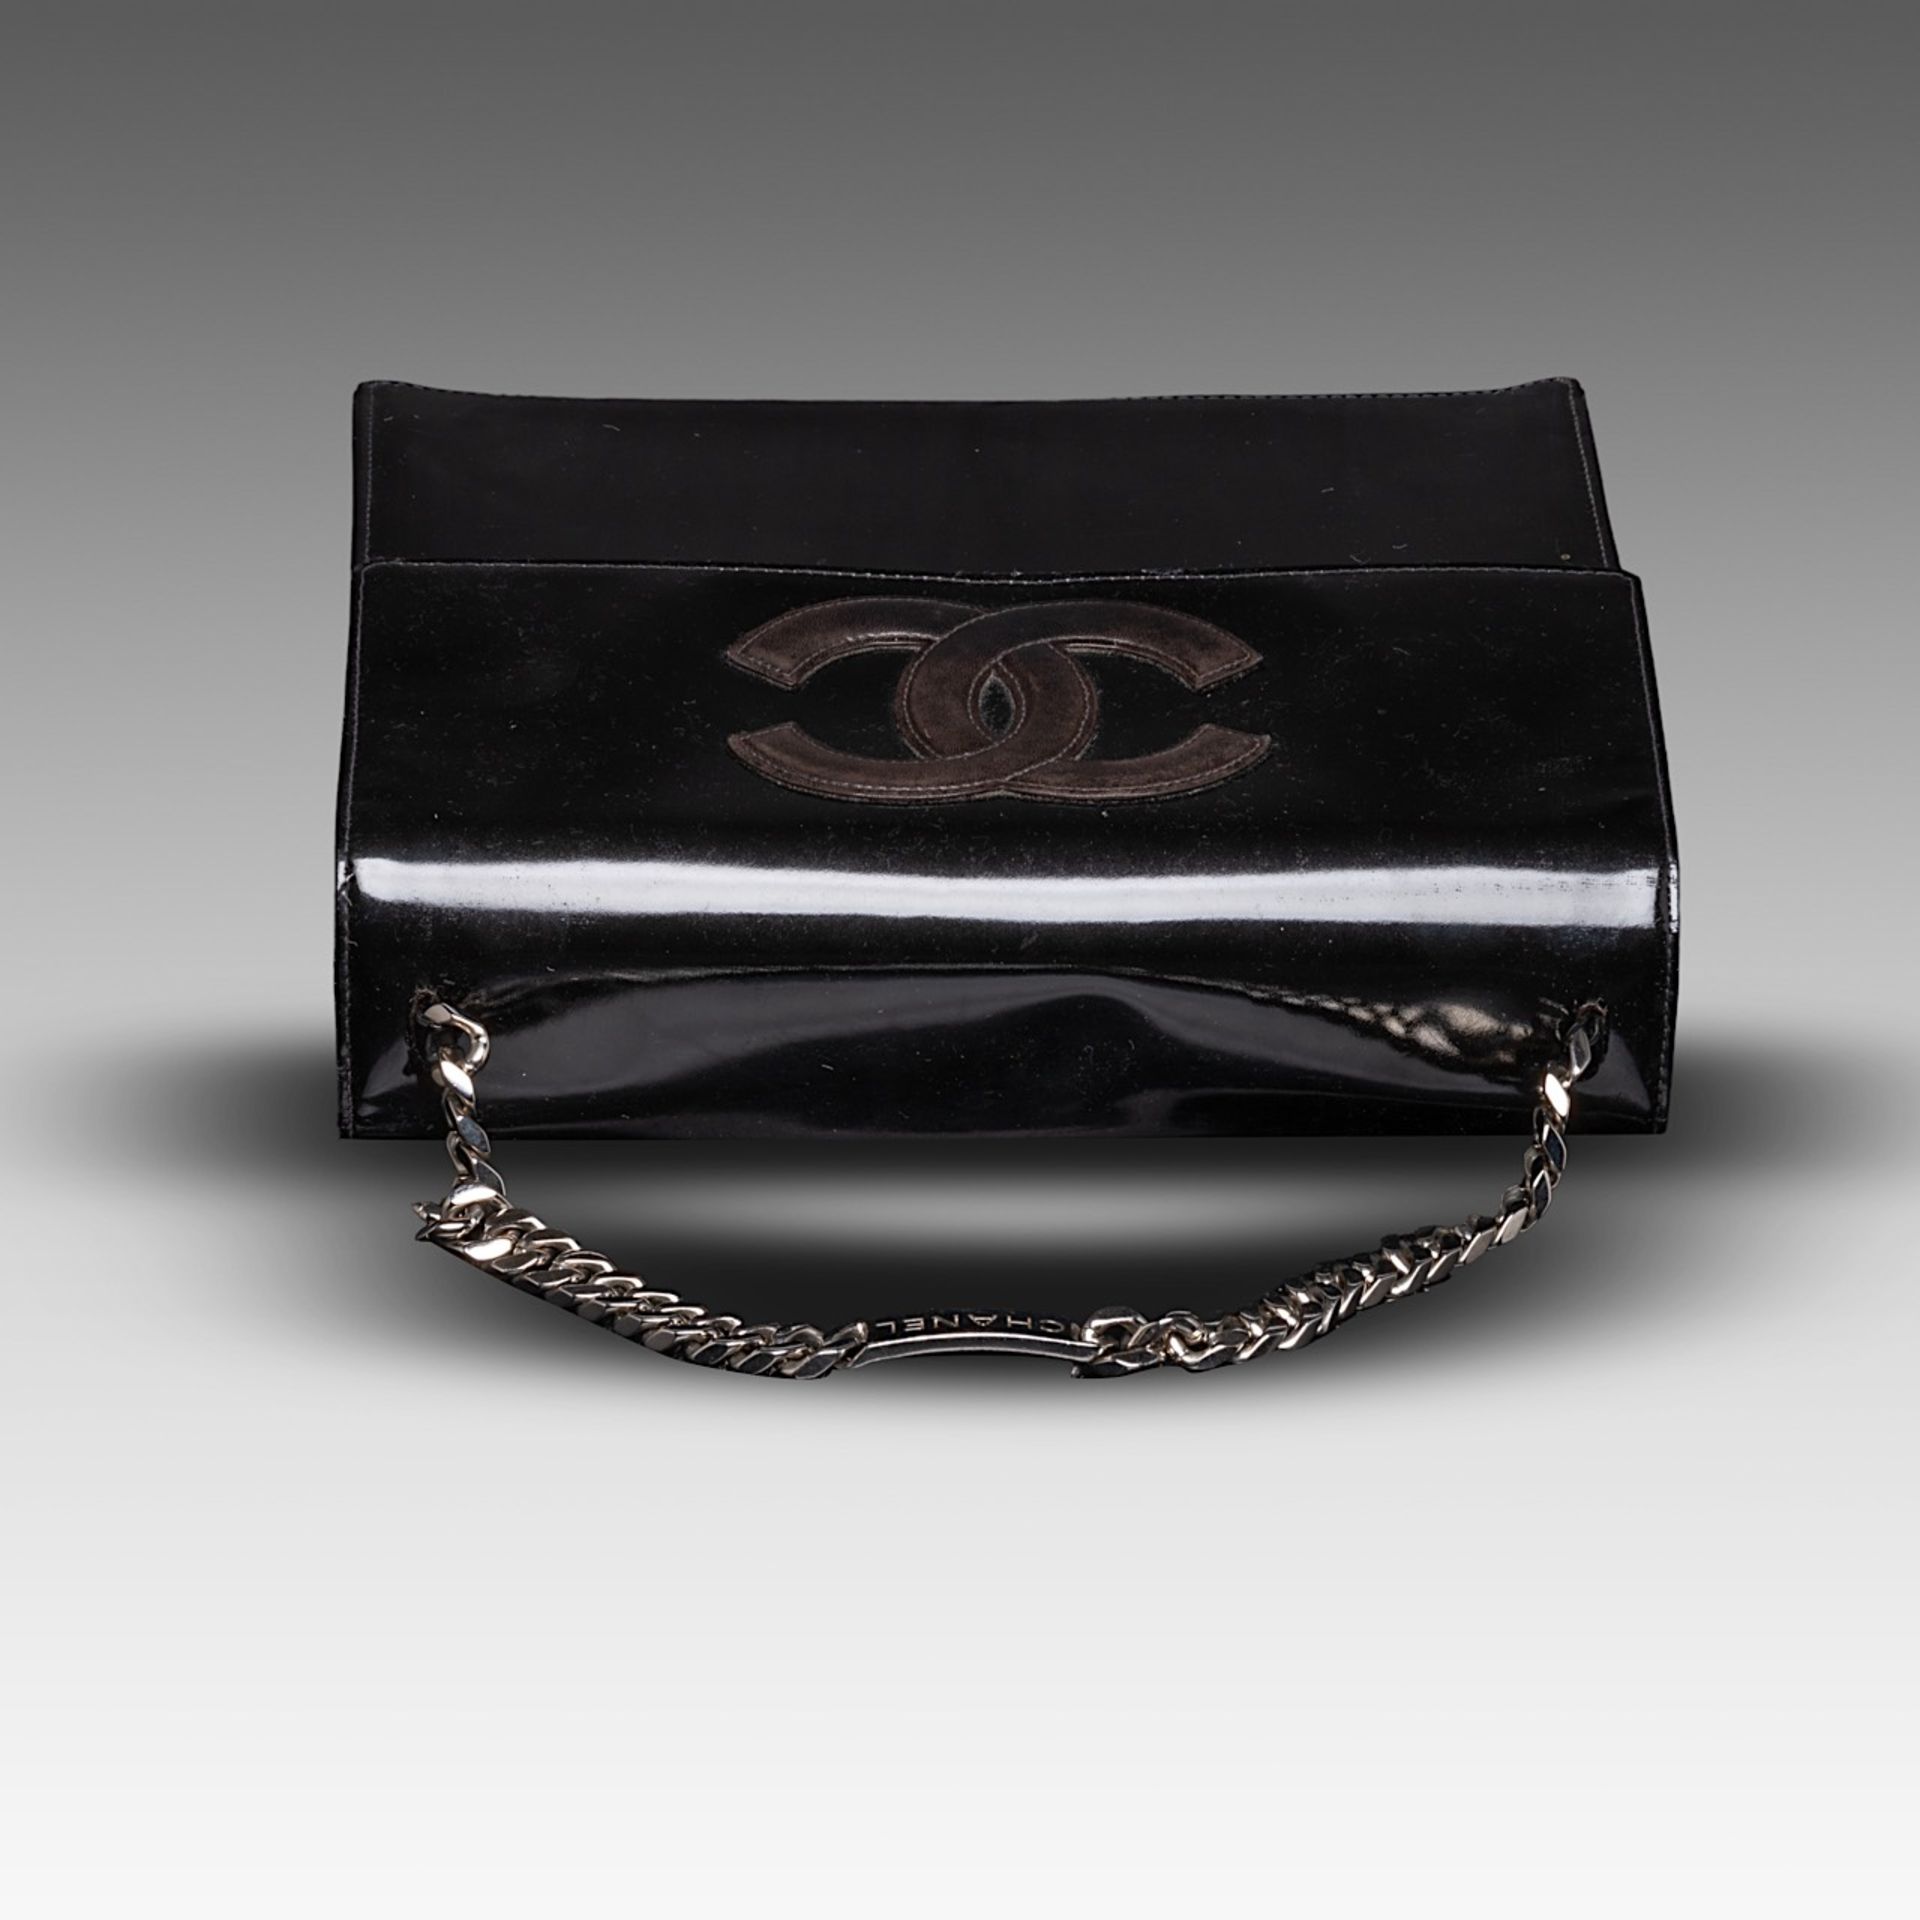 A Chanel flap handbag in black patent leather, H 22 - W 25 - D 8 cm - Image 8 of 10